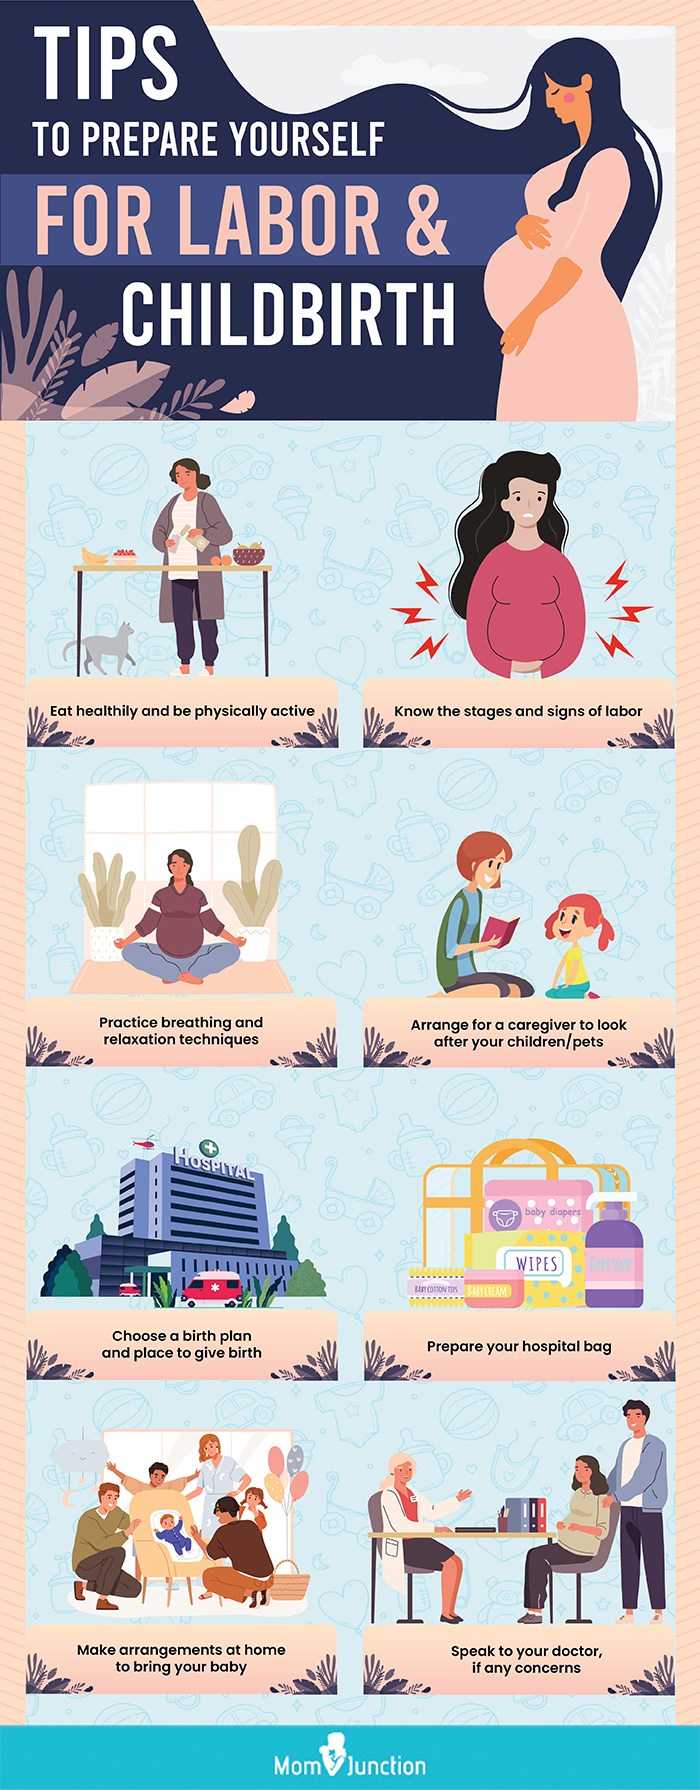 tips to prepare yourself for the labor and childbirth (infographic)